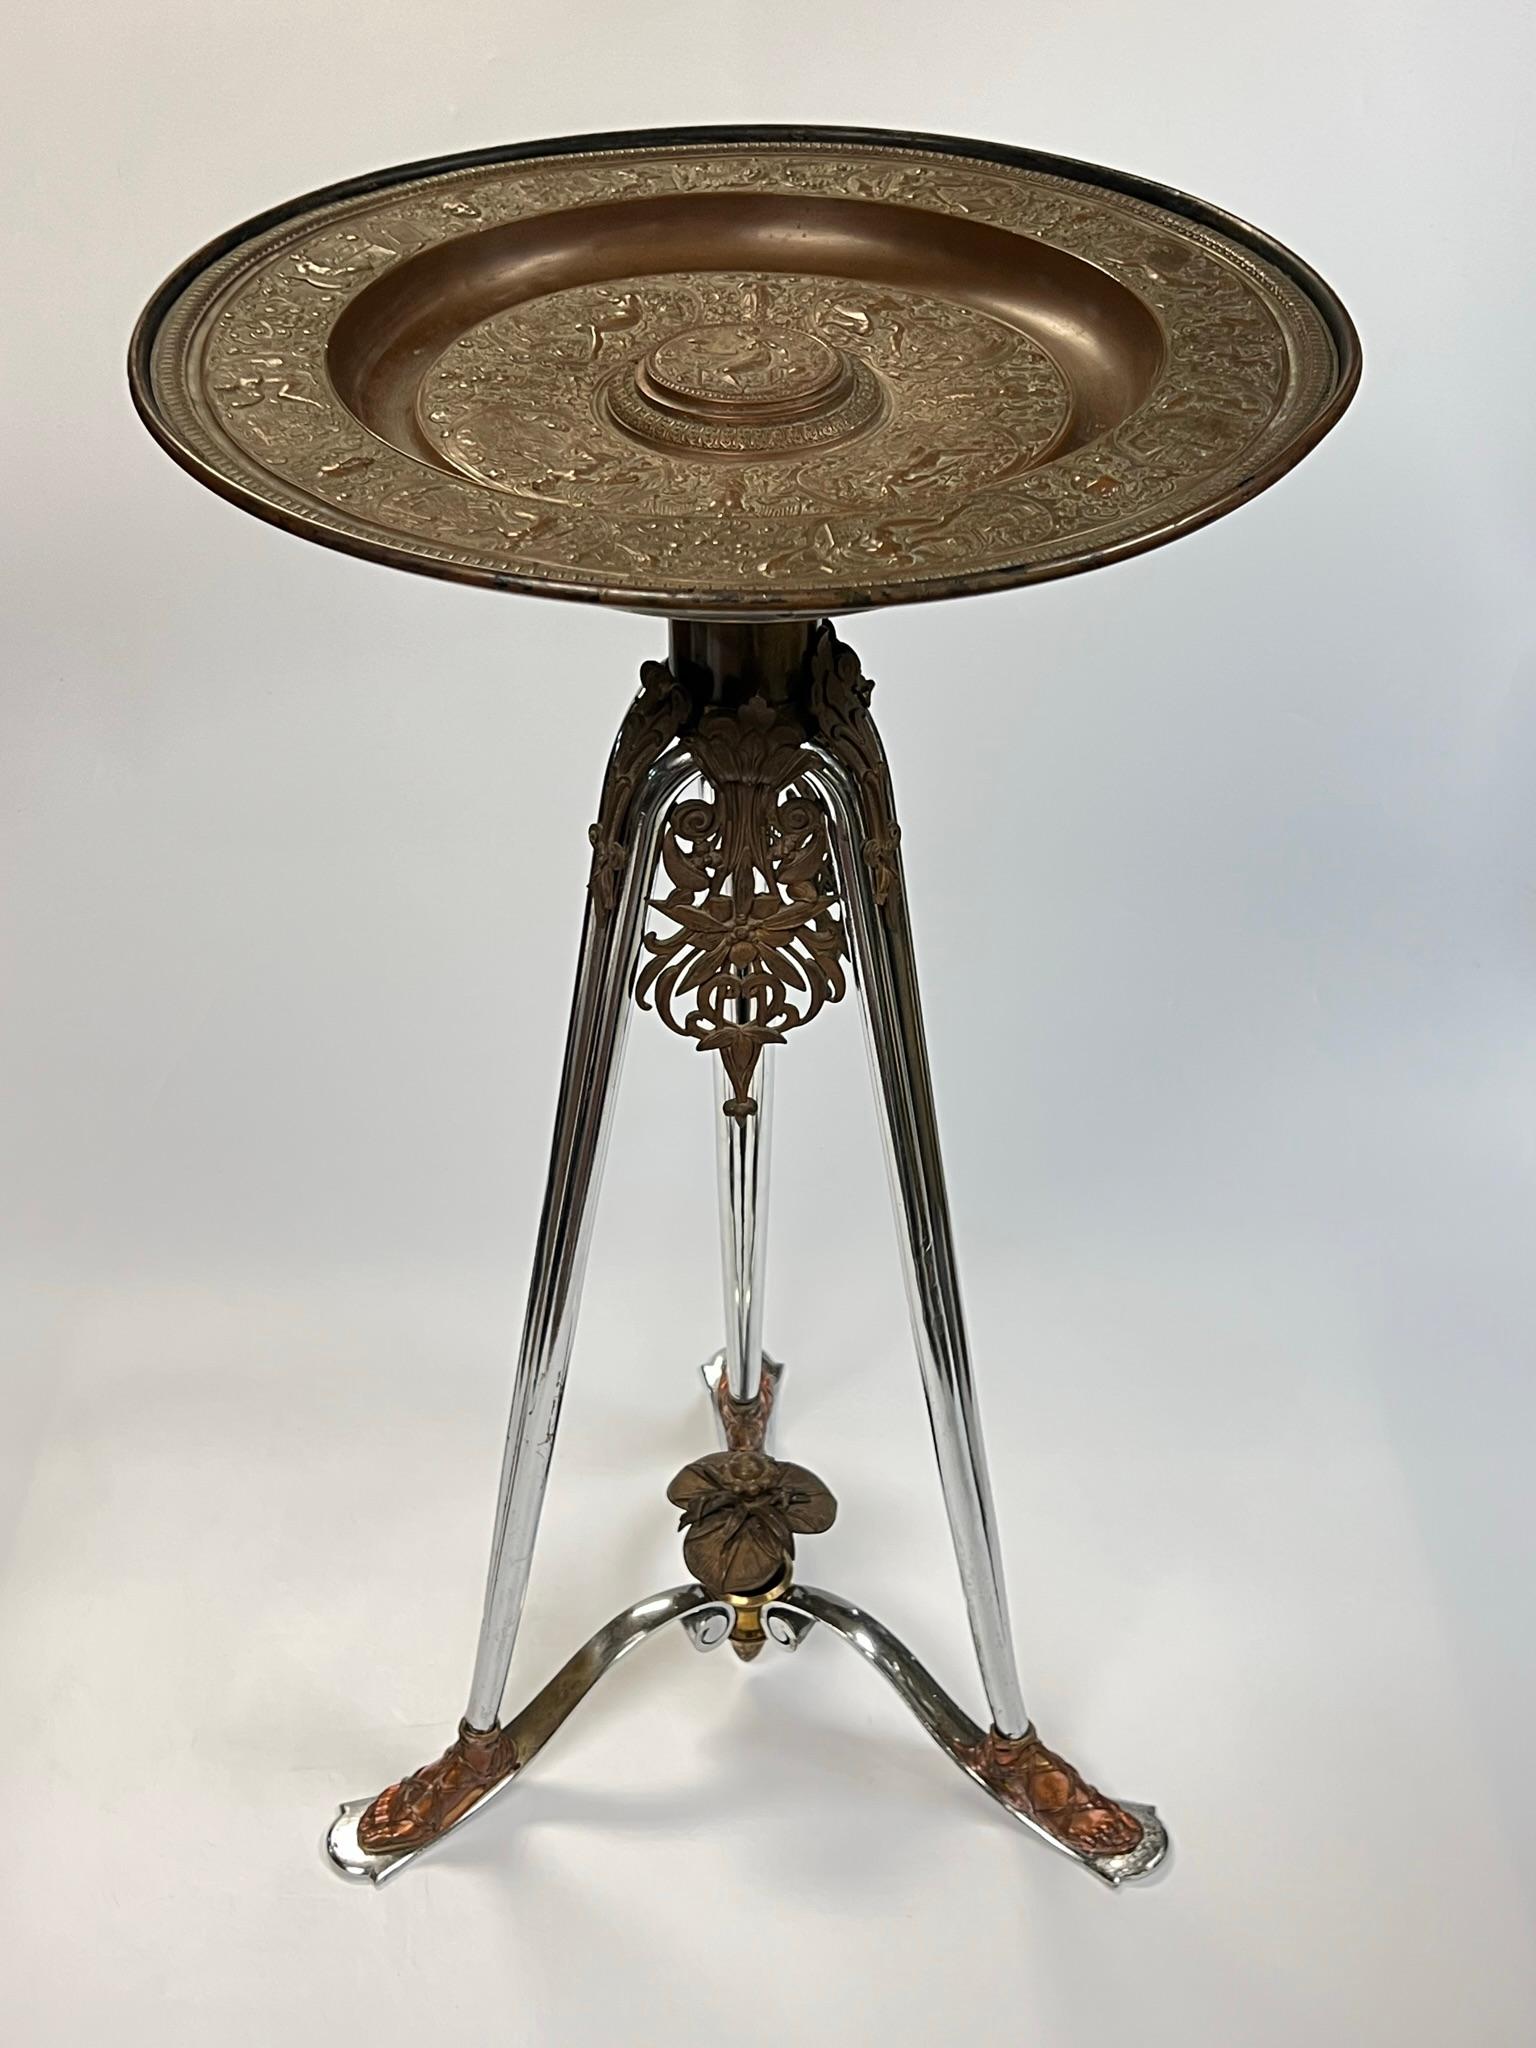 Antique stand in the Roman neoclassical style with round bronze charger decorated with Bacchanal theme depicting maidens and soldiers, with chromium plated legs terminating in feet wearing leather sandals. After a model by Francois Briot (ca